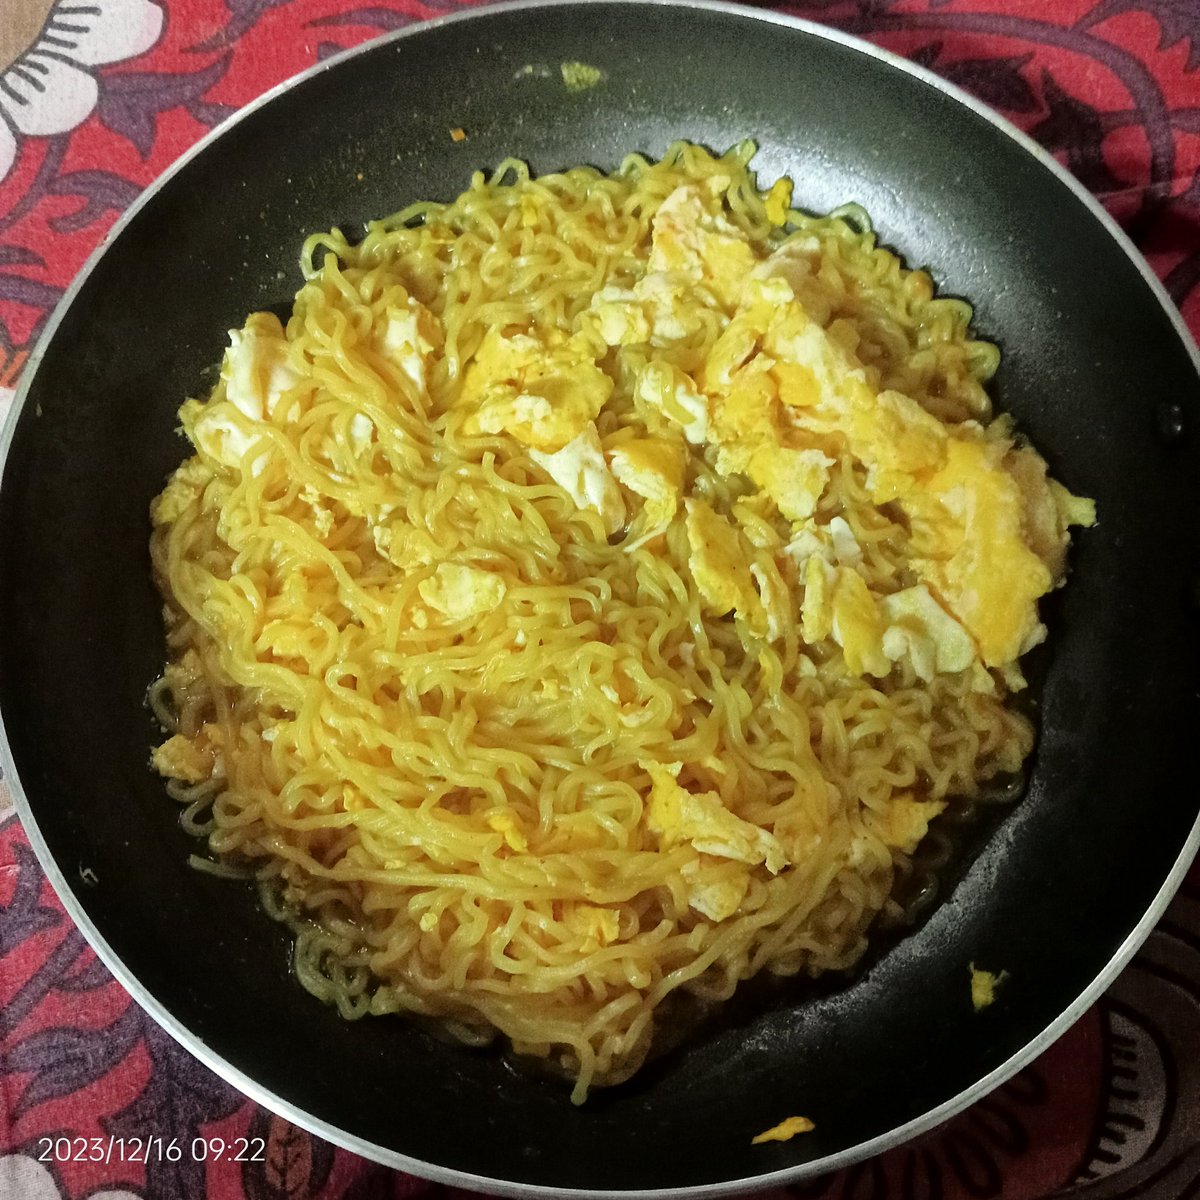 #WeekendBreakfast
Noodles with Scrambled Eggs😍 No Hassle 😂